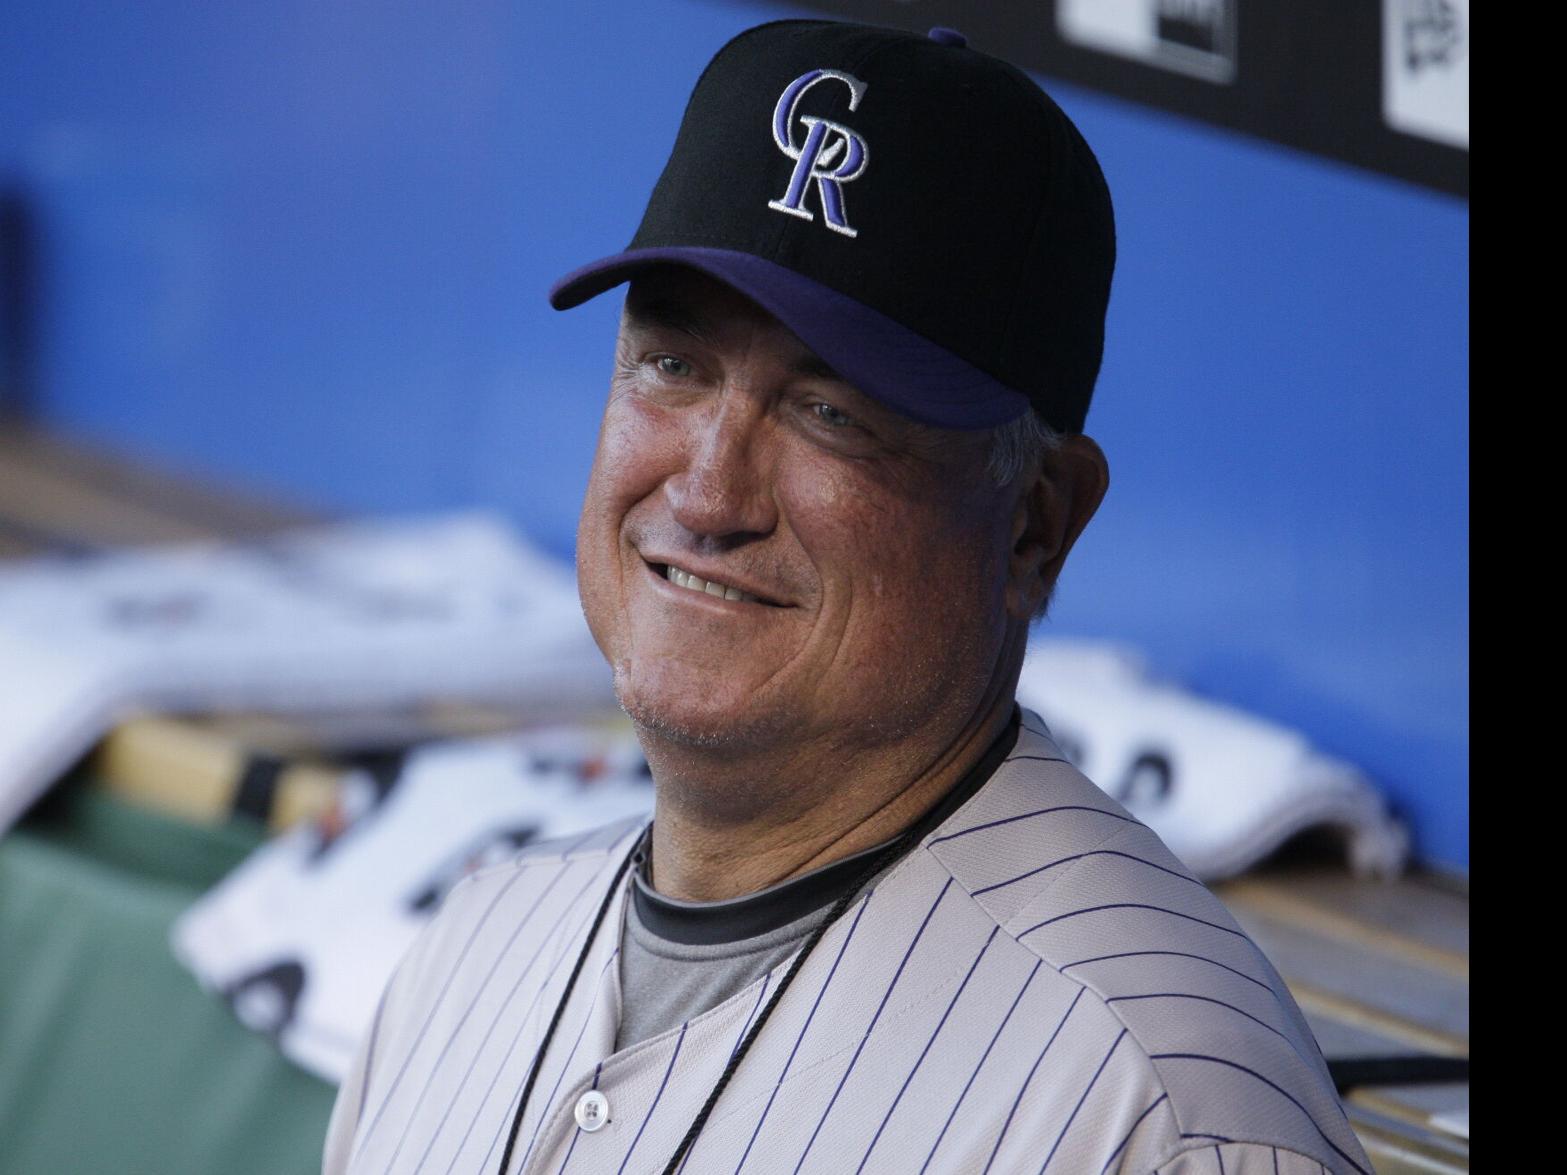 Rockies Hire Clint Hurdle As Special Assistant To The GM - CBS Colorado